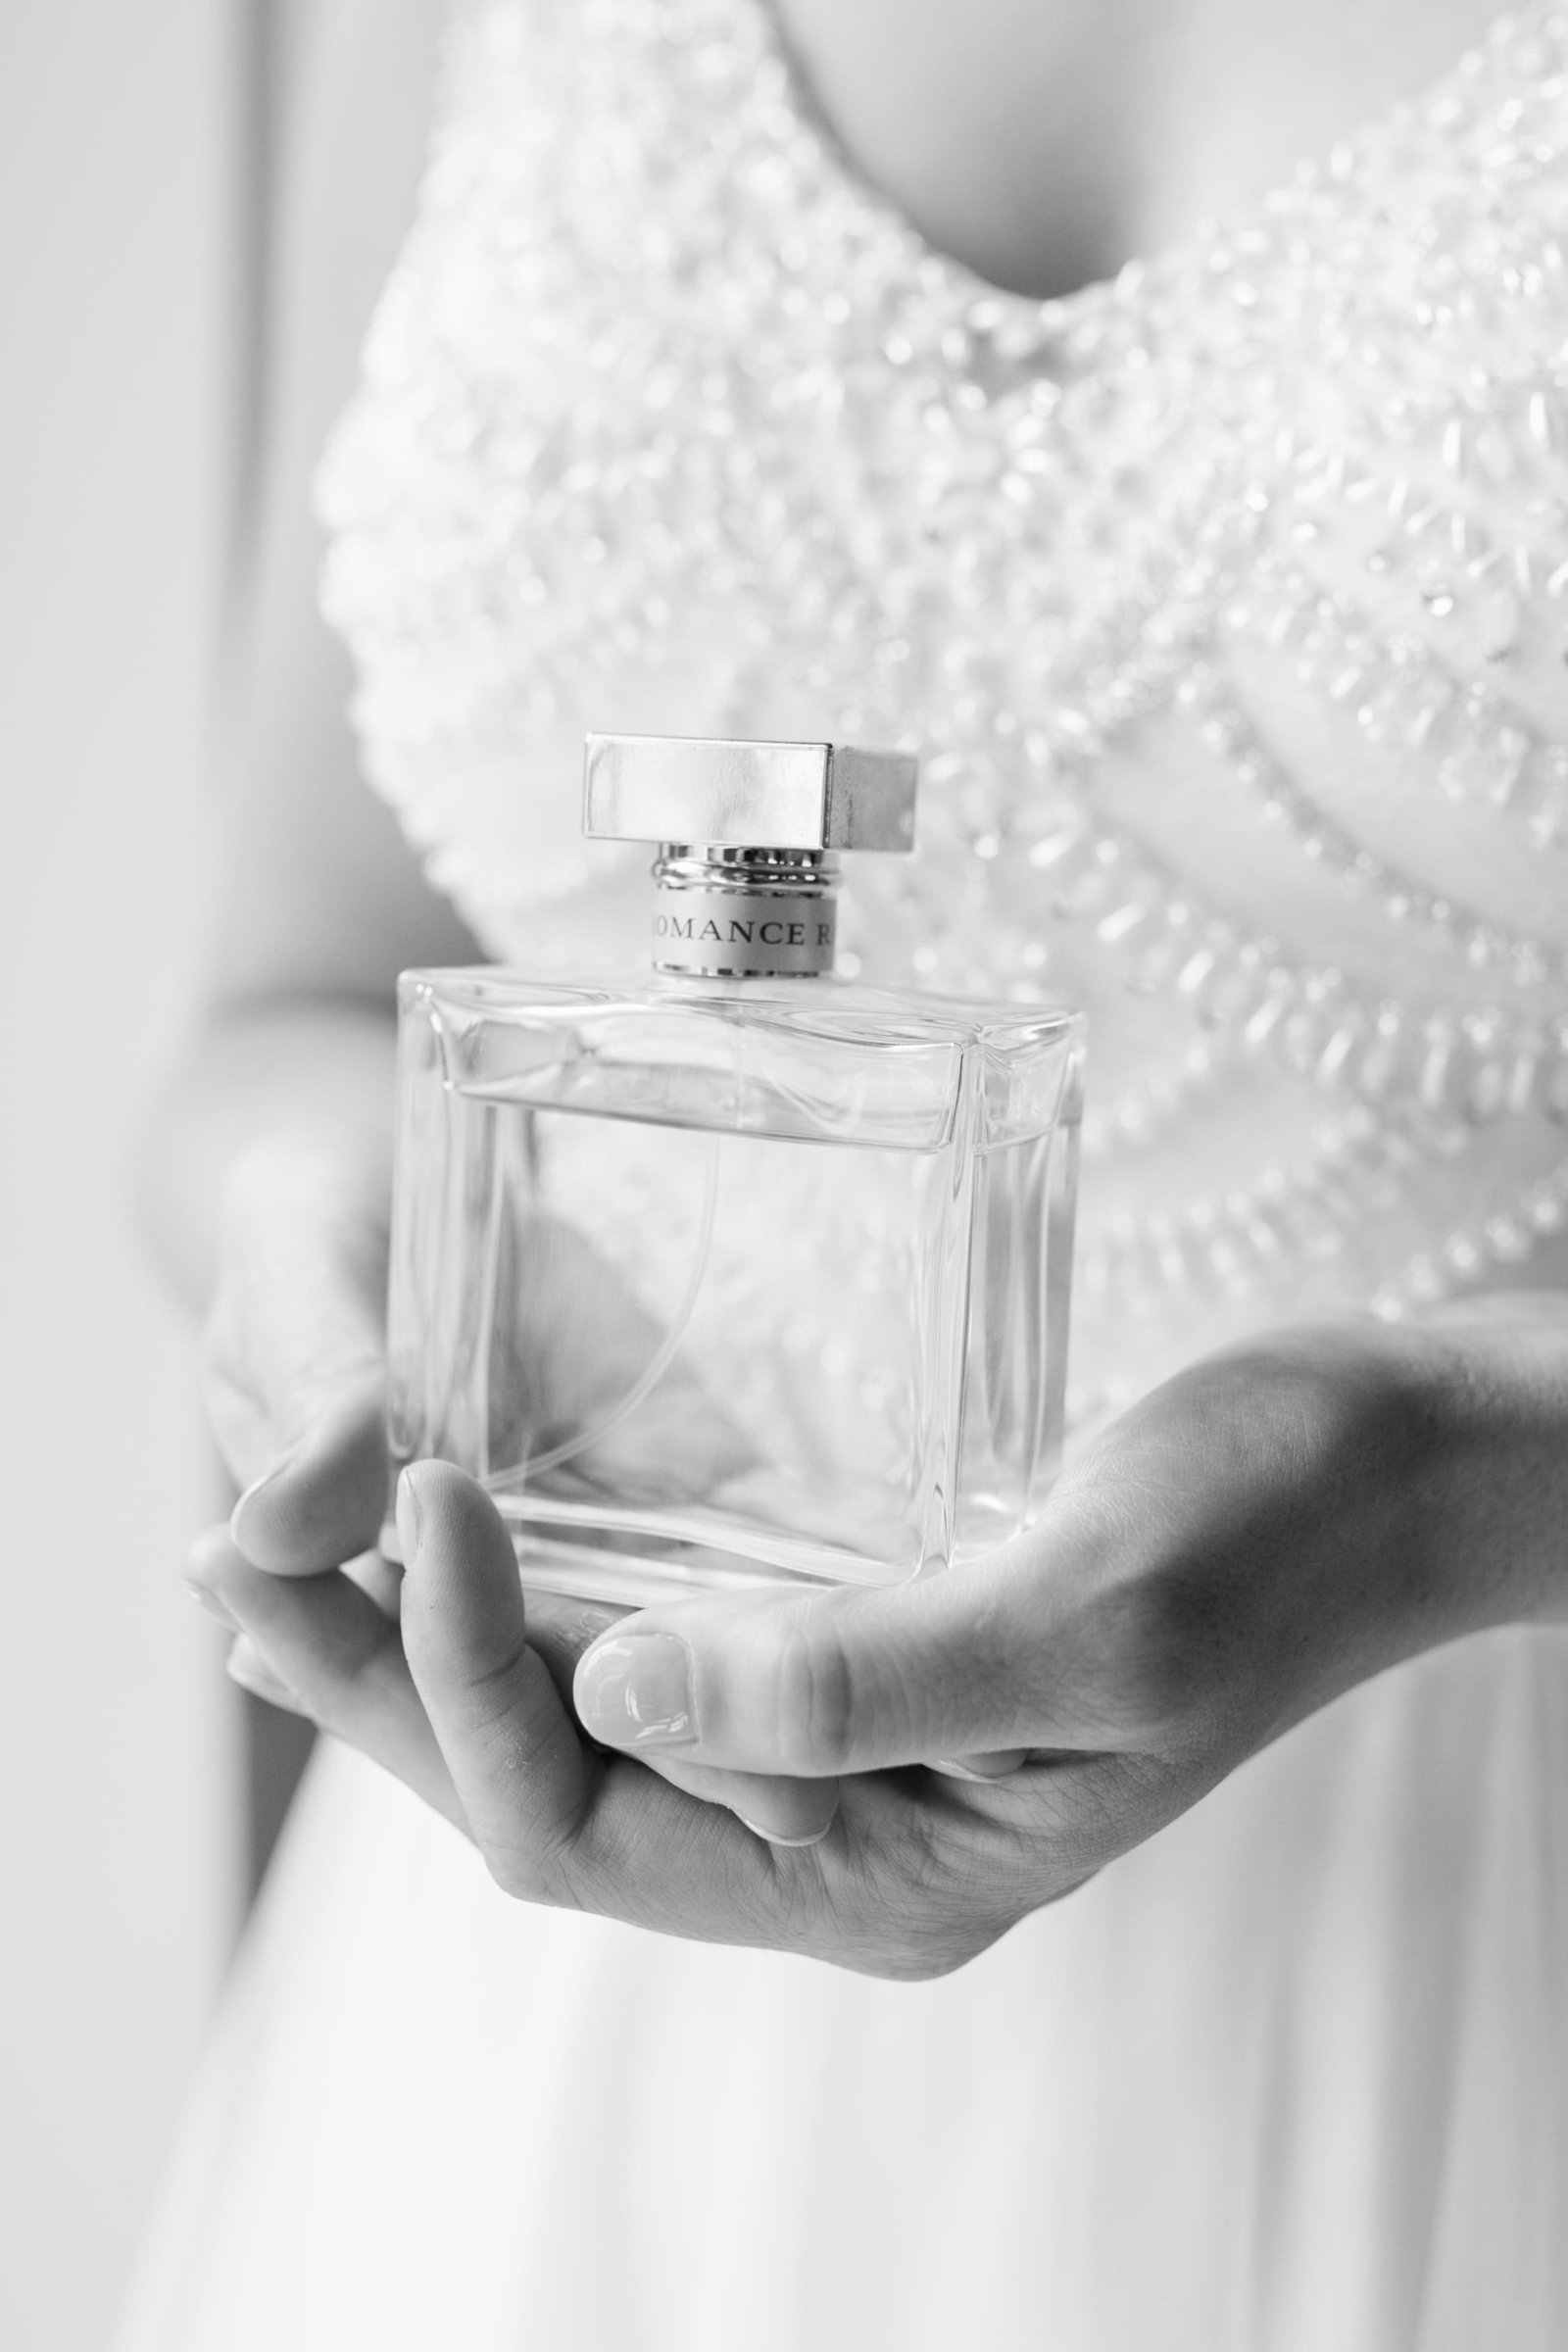 Every bride should have a signature perfume